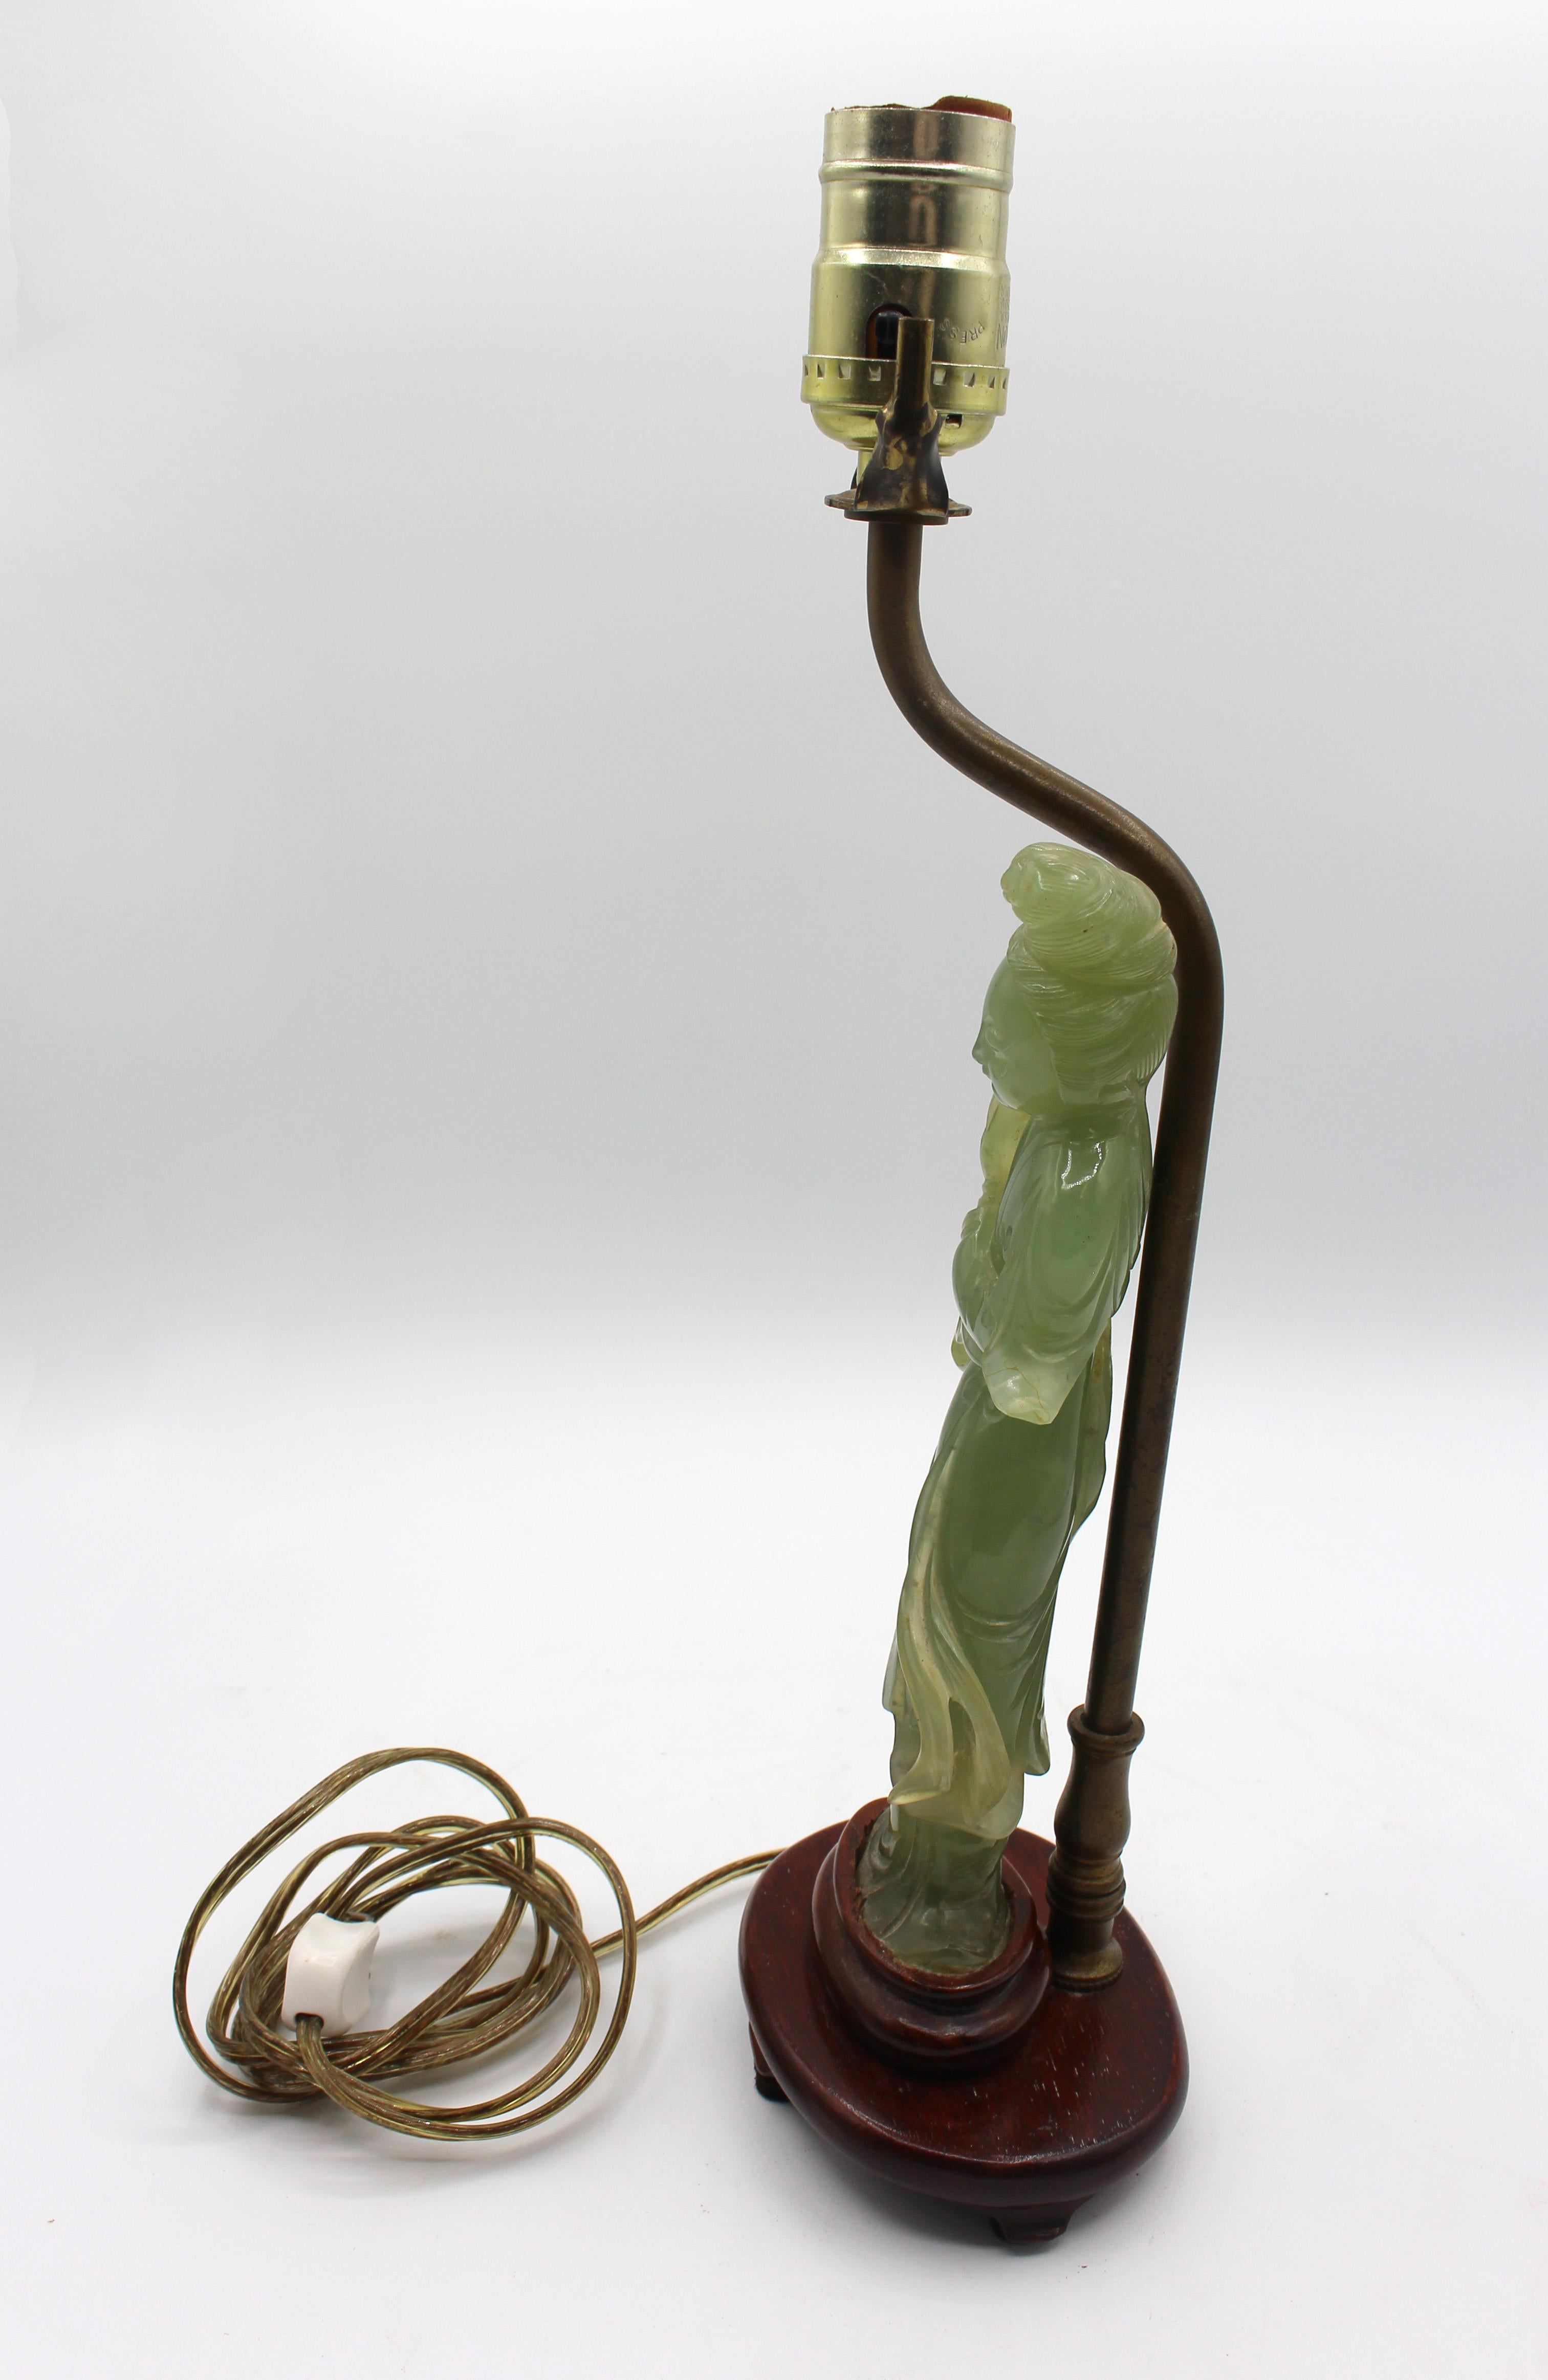 Late 19th century celadon quartz Guan Yin figure, made into a lamp, Chinese. Late Qing. Lamped in the 1920s and newly electrified.
Figure: 8.25